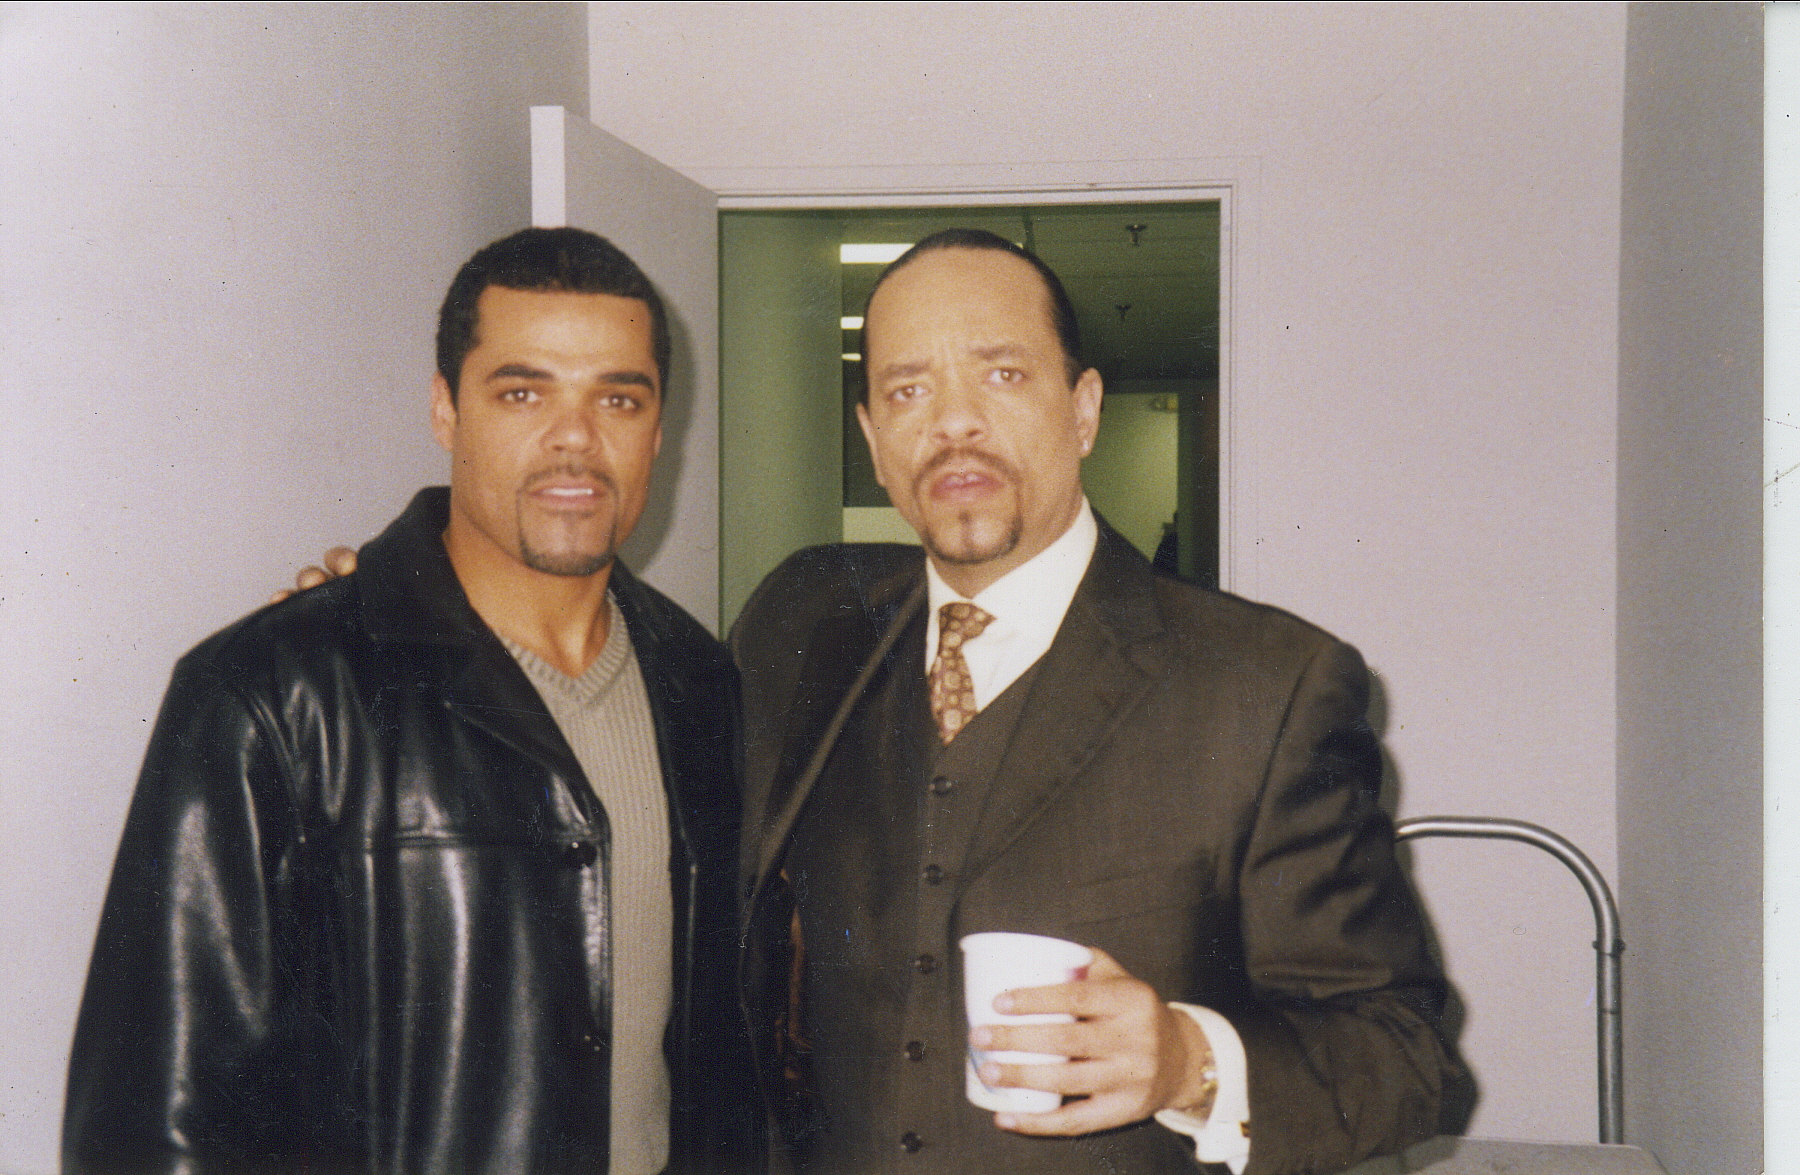 ICE-T and (Stunt Double) Brian Keith Allen on the set of 'Law & Order Special Victim Unit'.